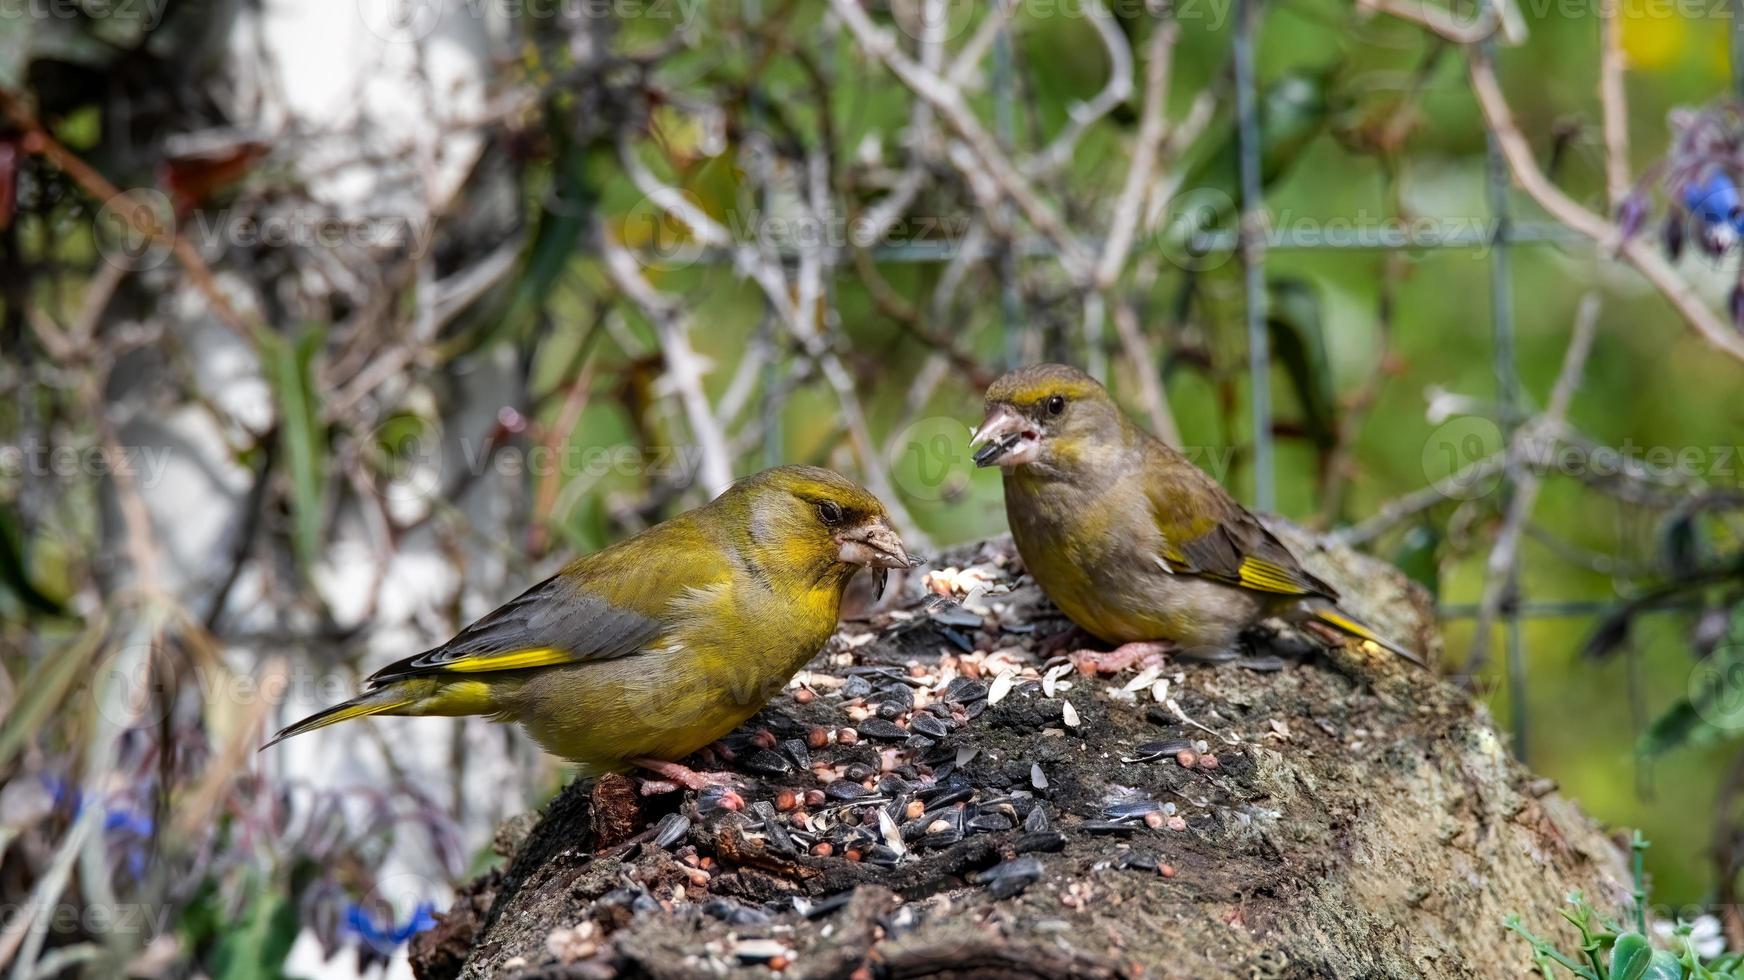 two greenfinch birds perched on a bark photo